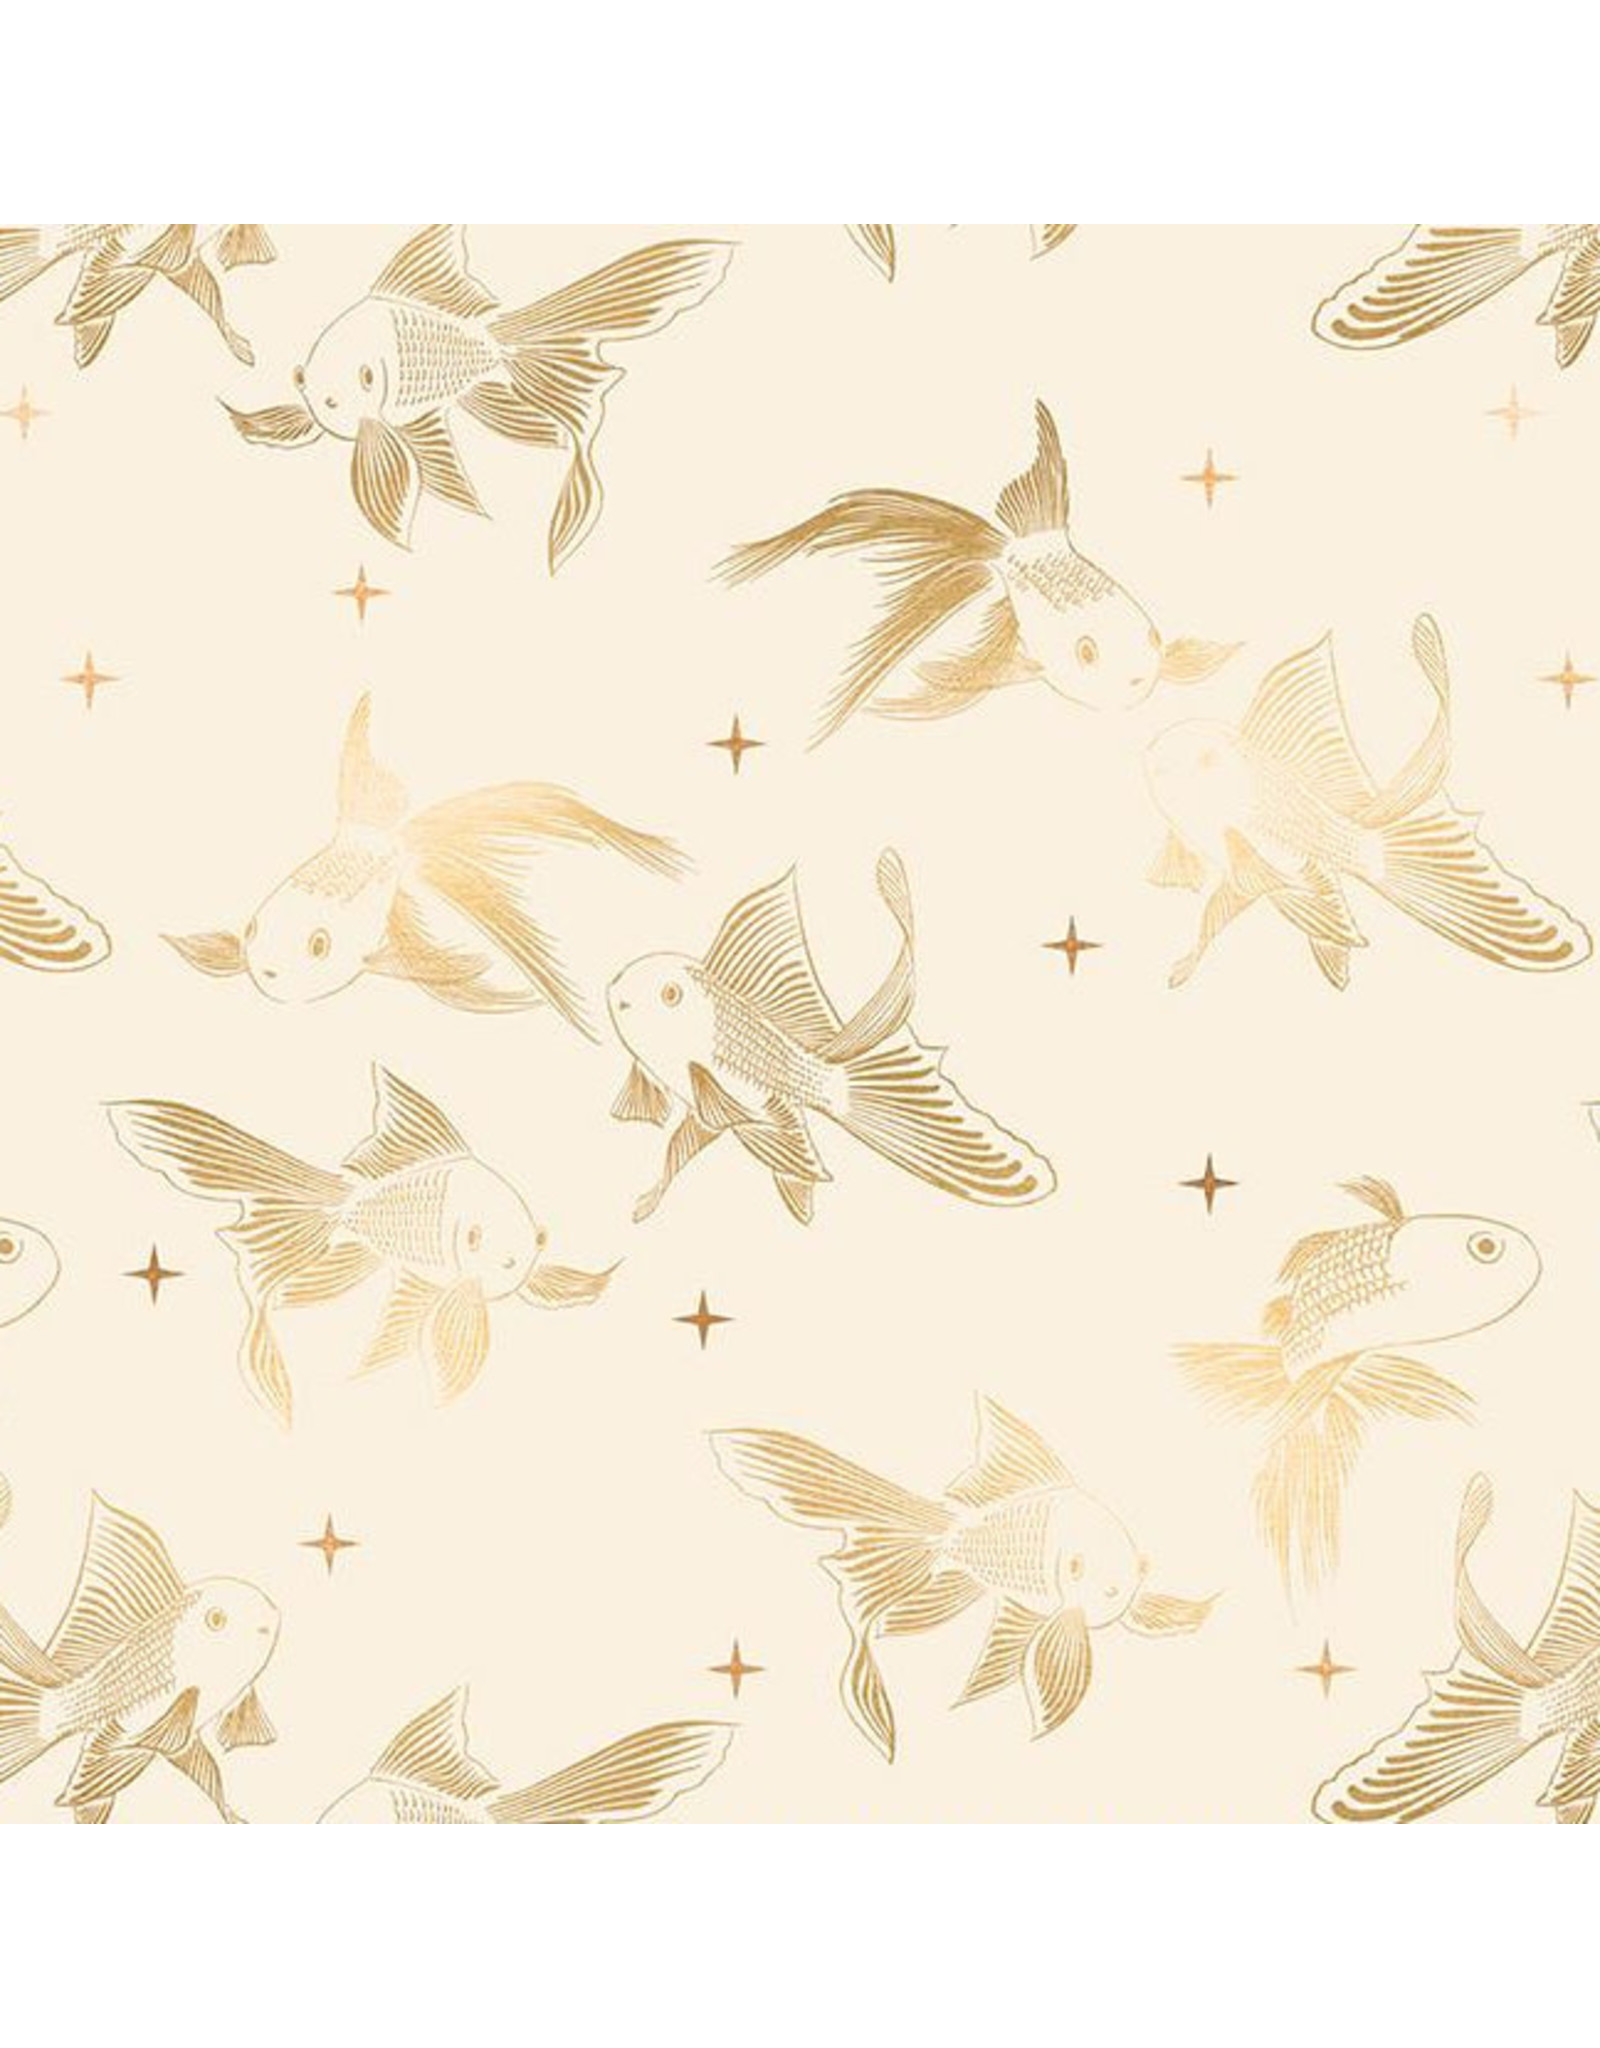 Melody Miller Curio, Goldfish in Natural with Metallic, Fabric Half-Yards